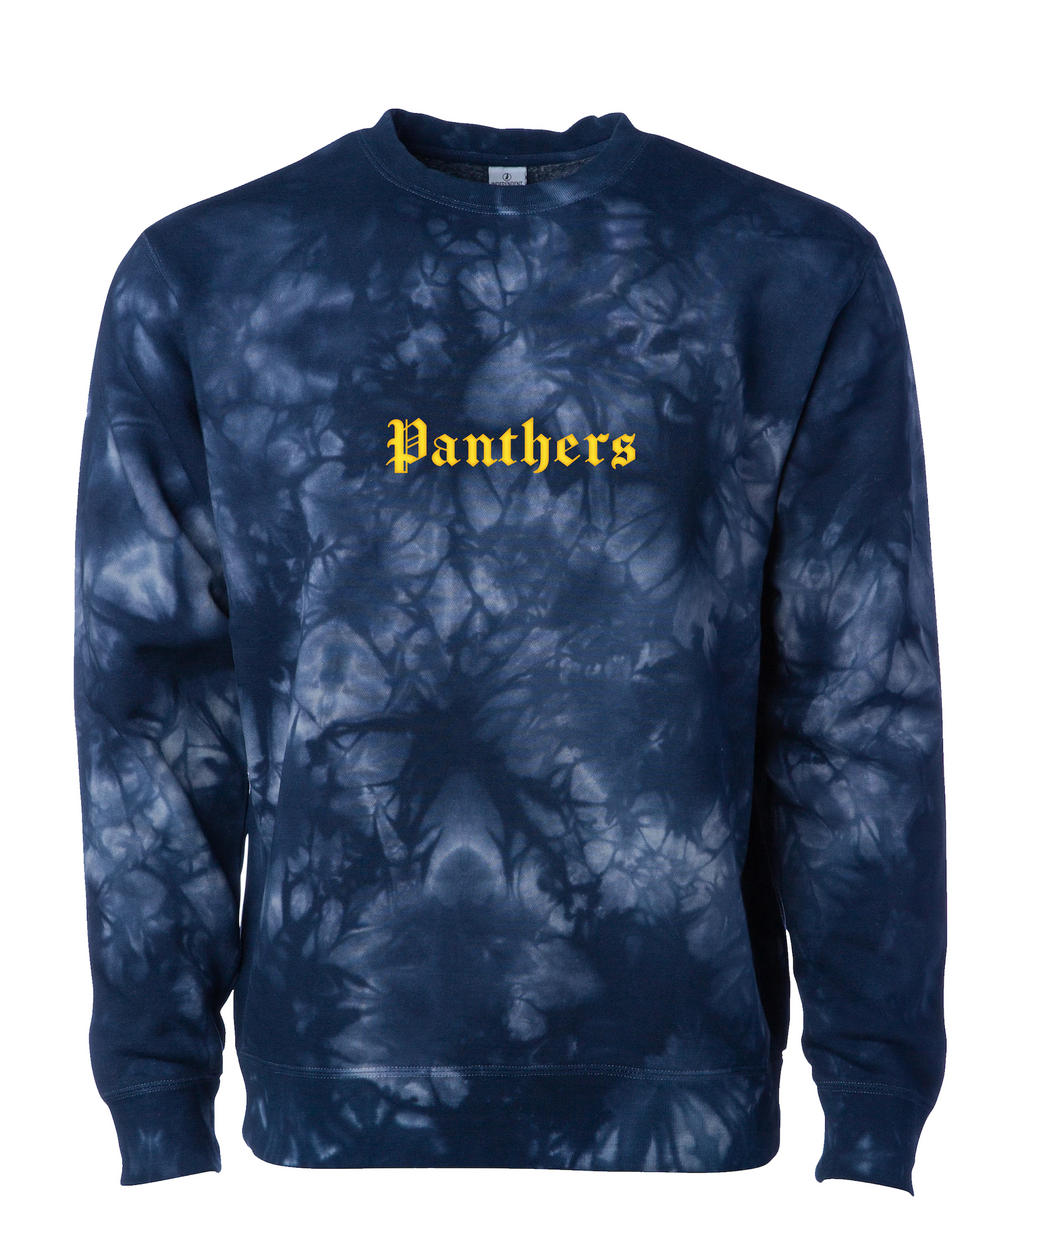 Old Style Panther Reflective Gold Tie Dye Crewneck